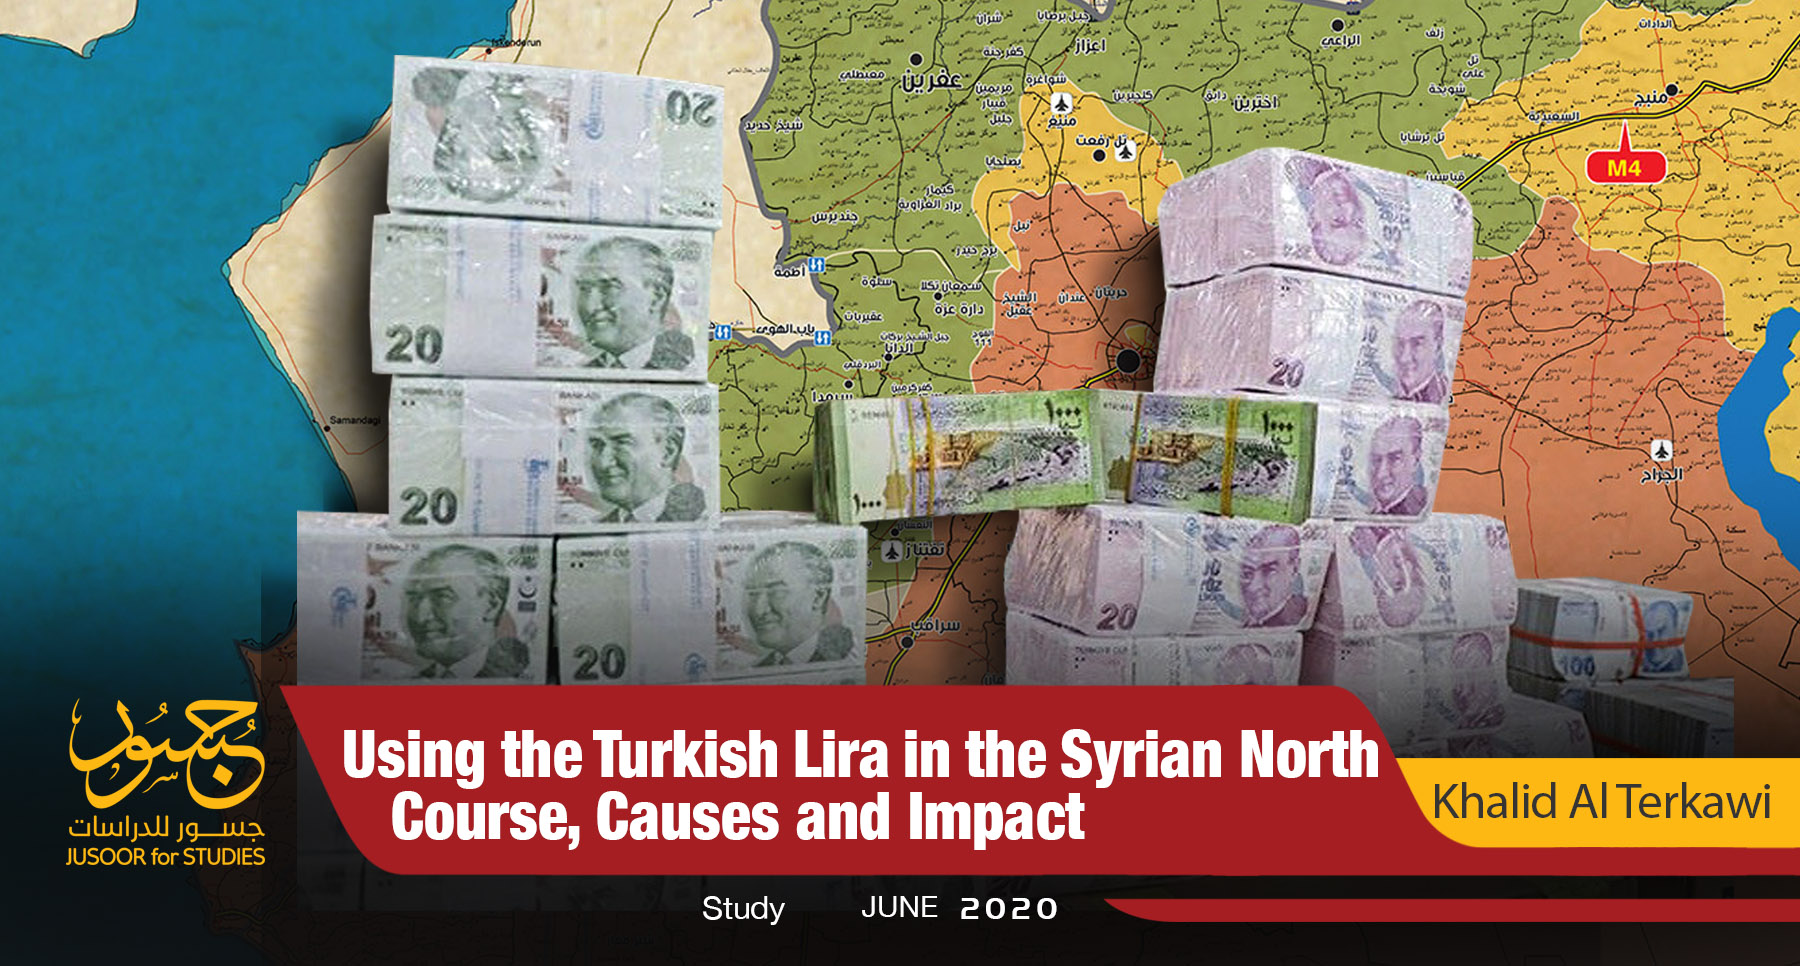 Using the Turkish Lira in the Syrian North: Course, Causes and Impact